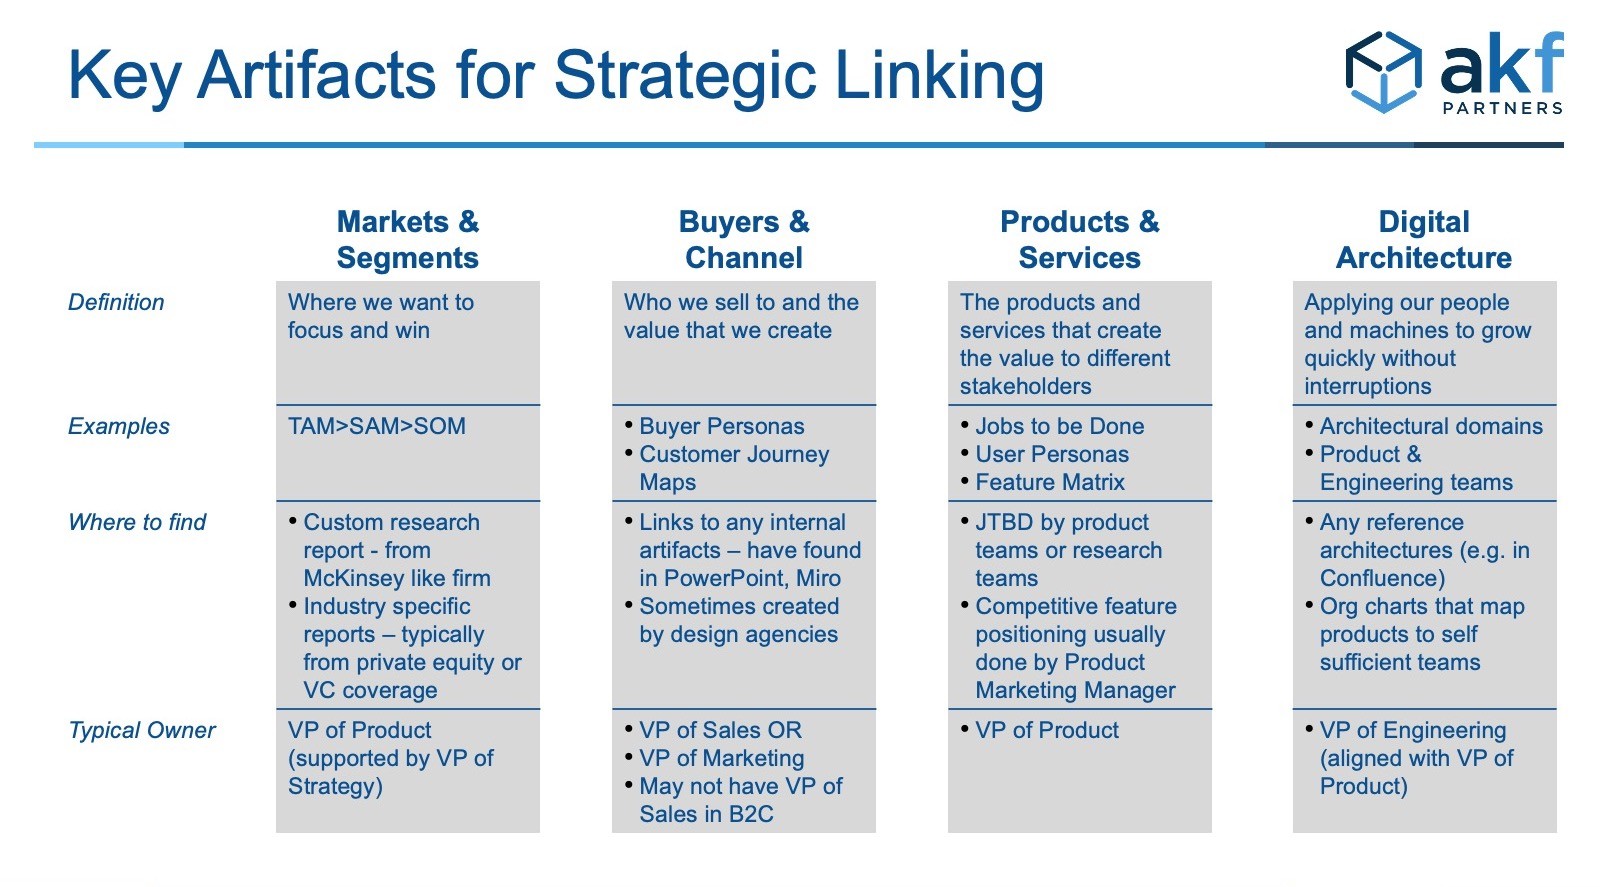 key artifacts to link strategy to architecture